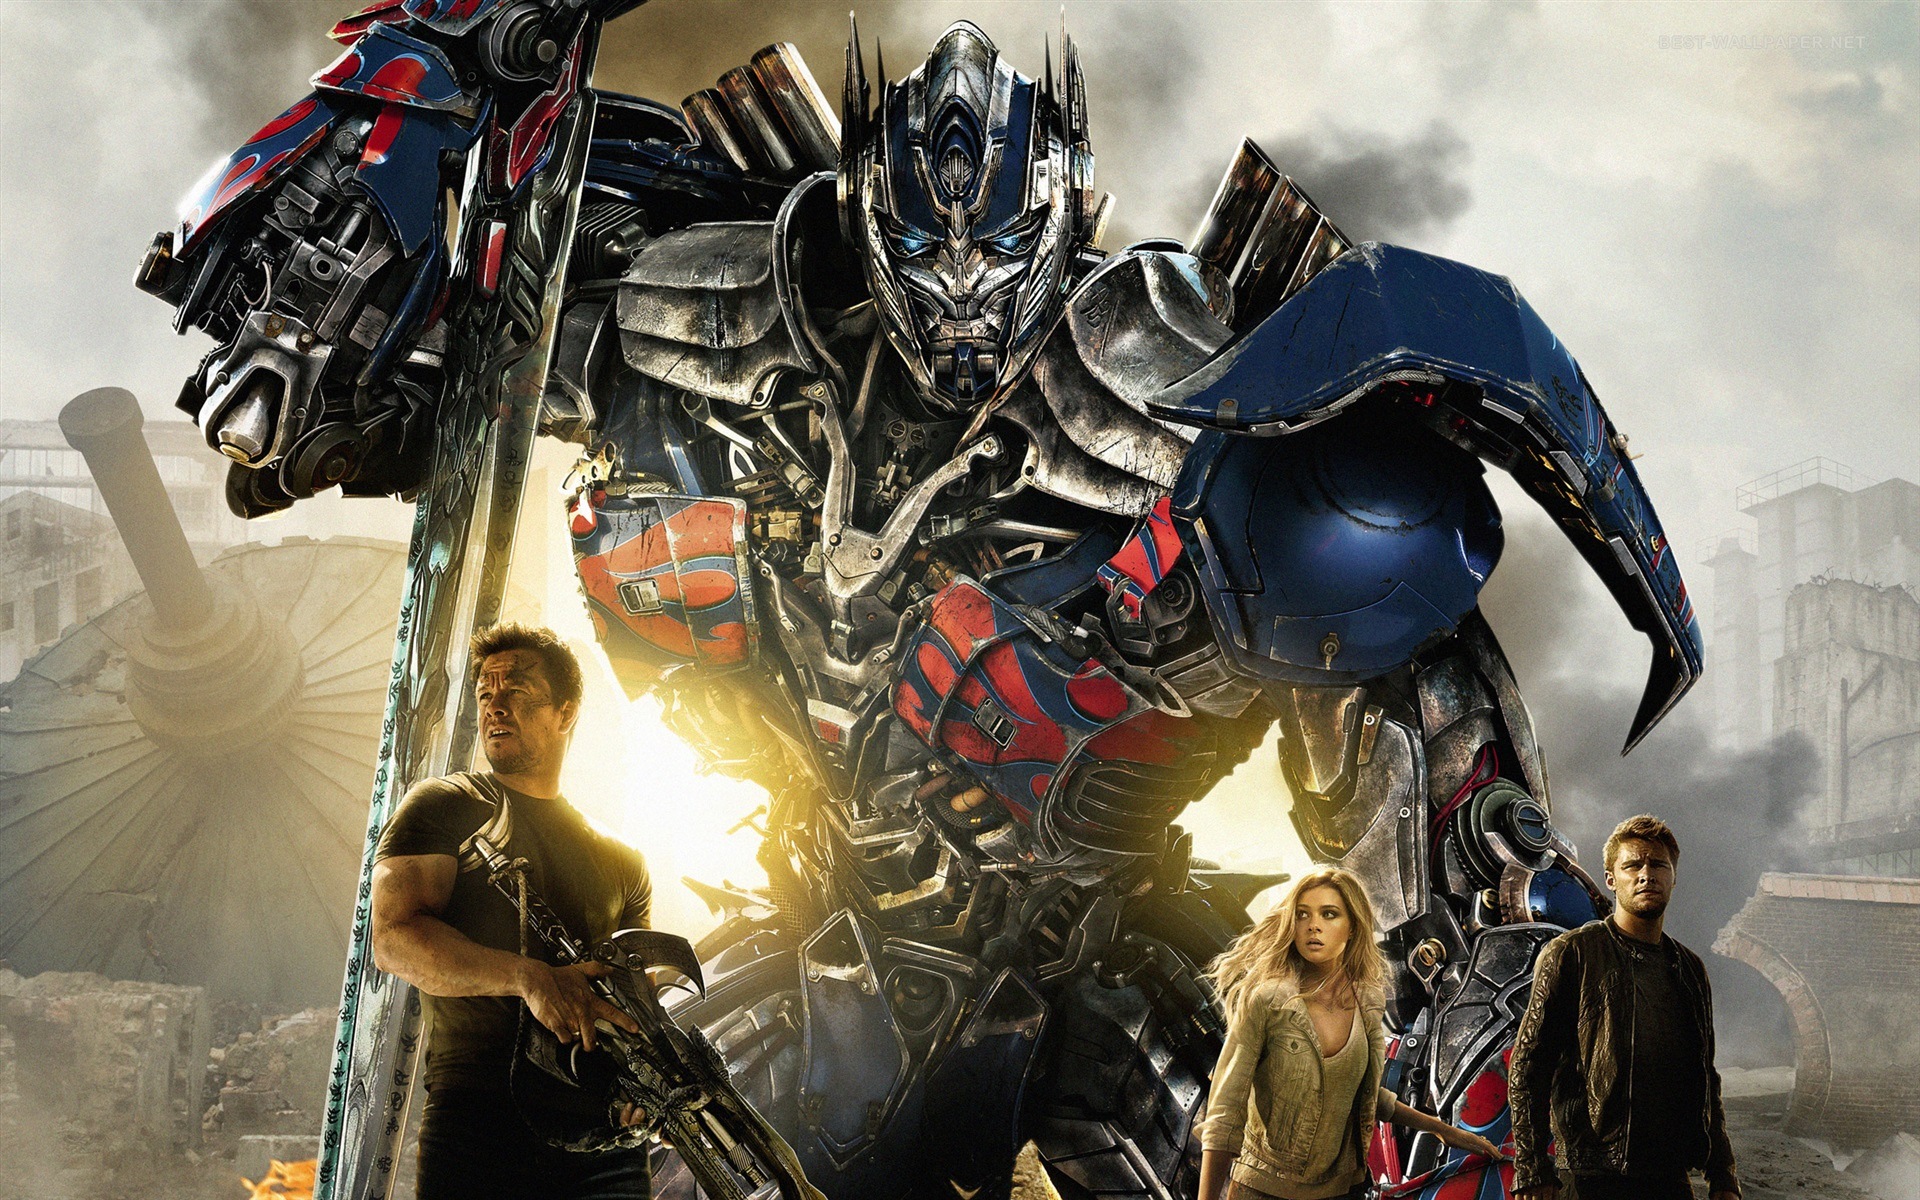 2014 Transformers: Age of Extinction HD wallpapers #1 - 1920x1200